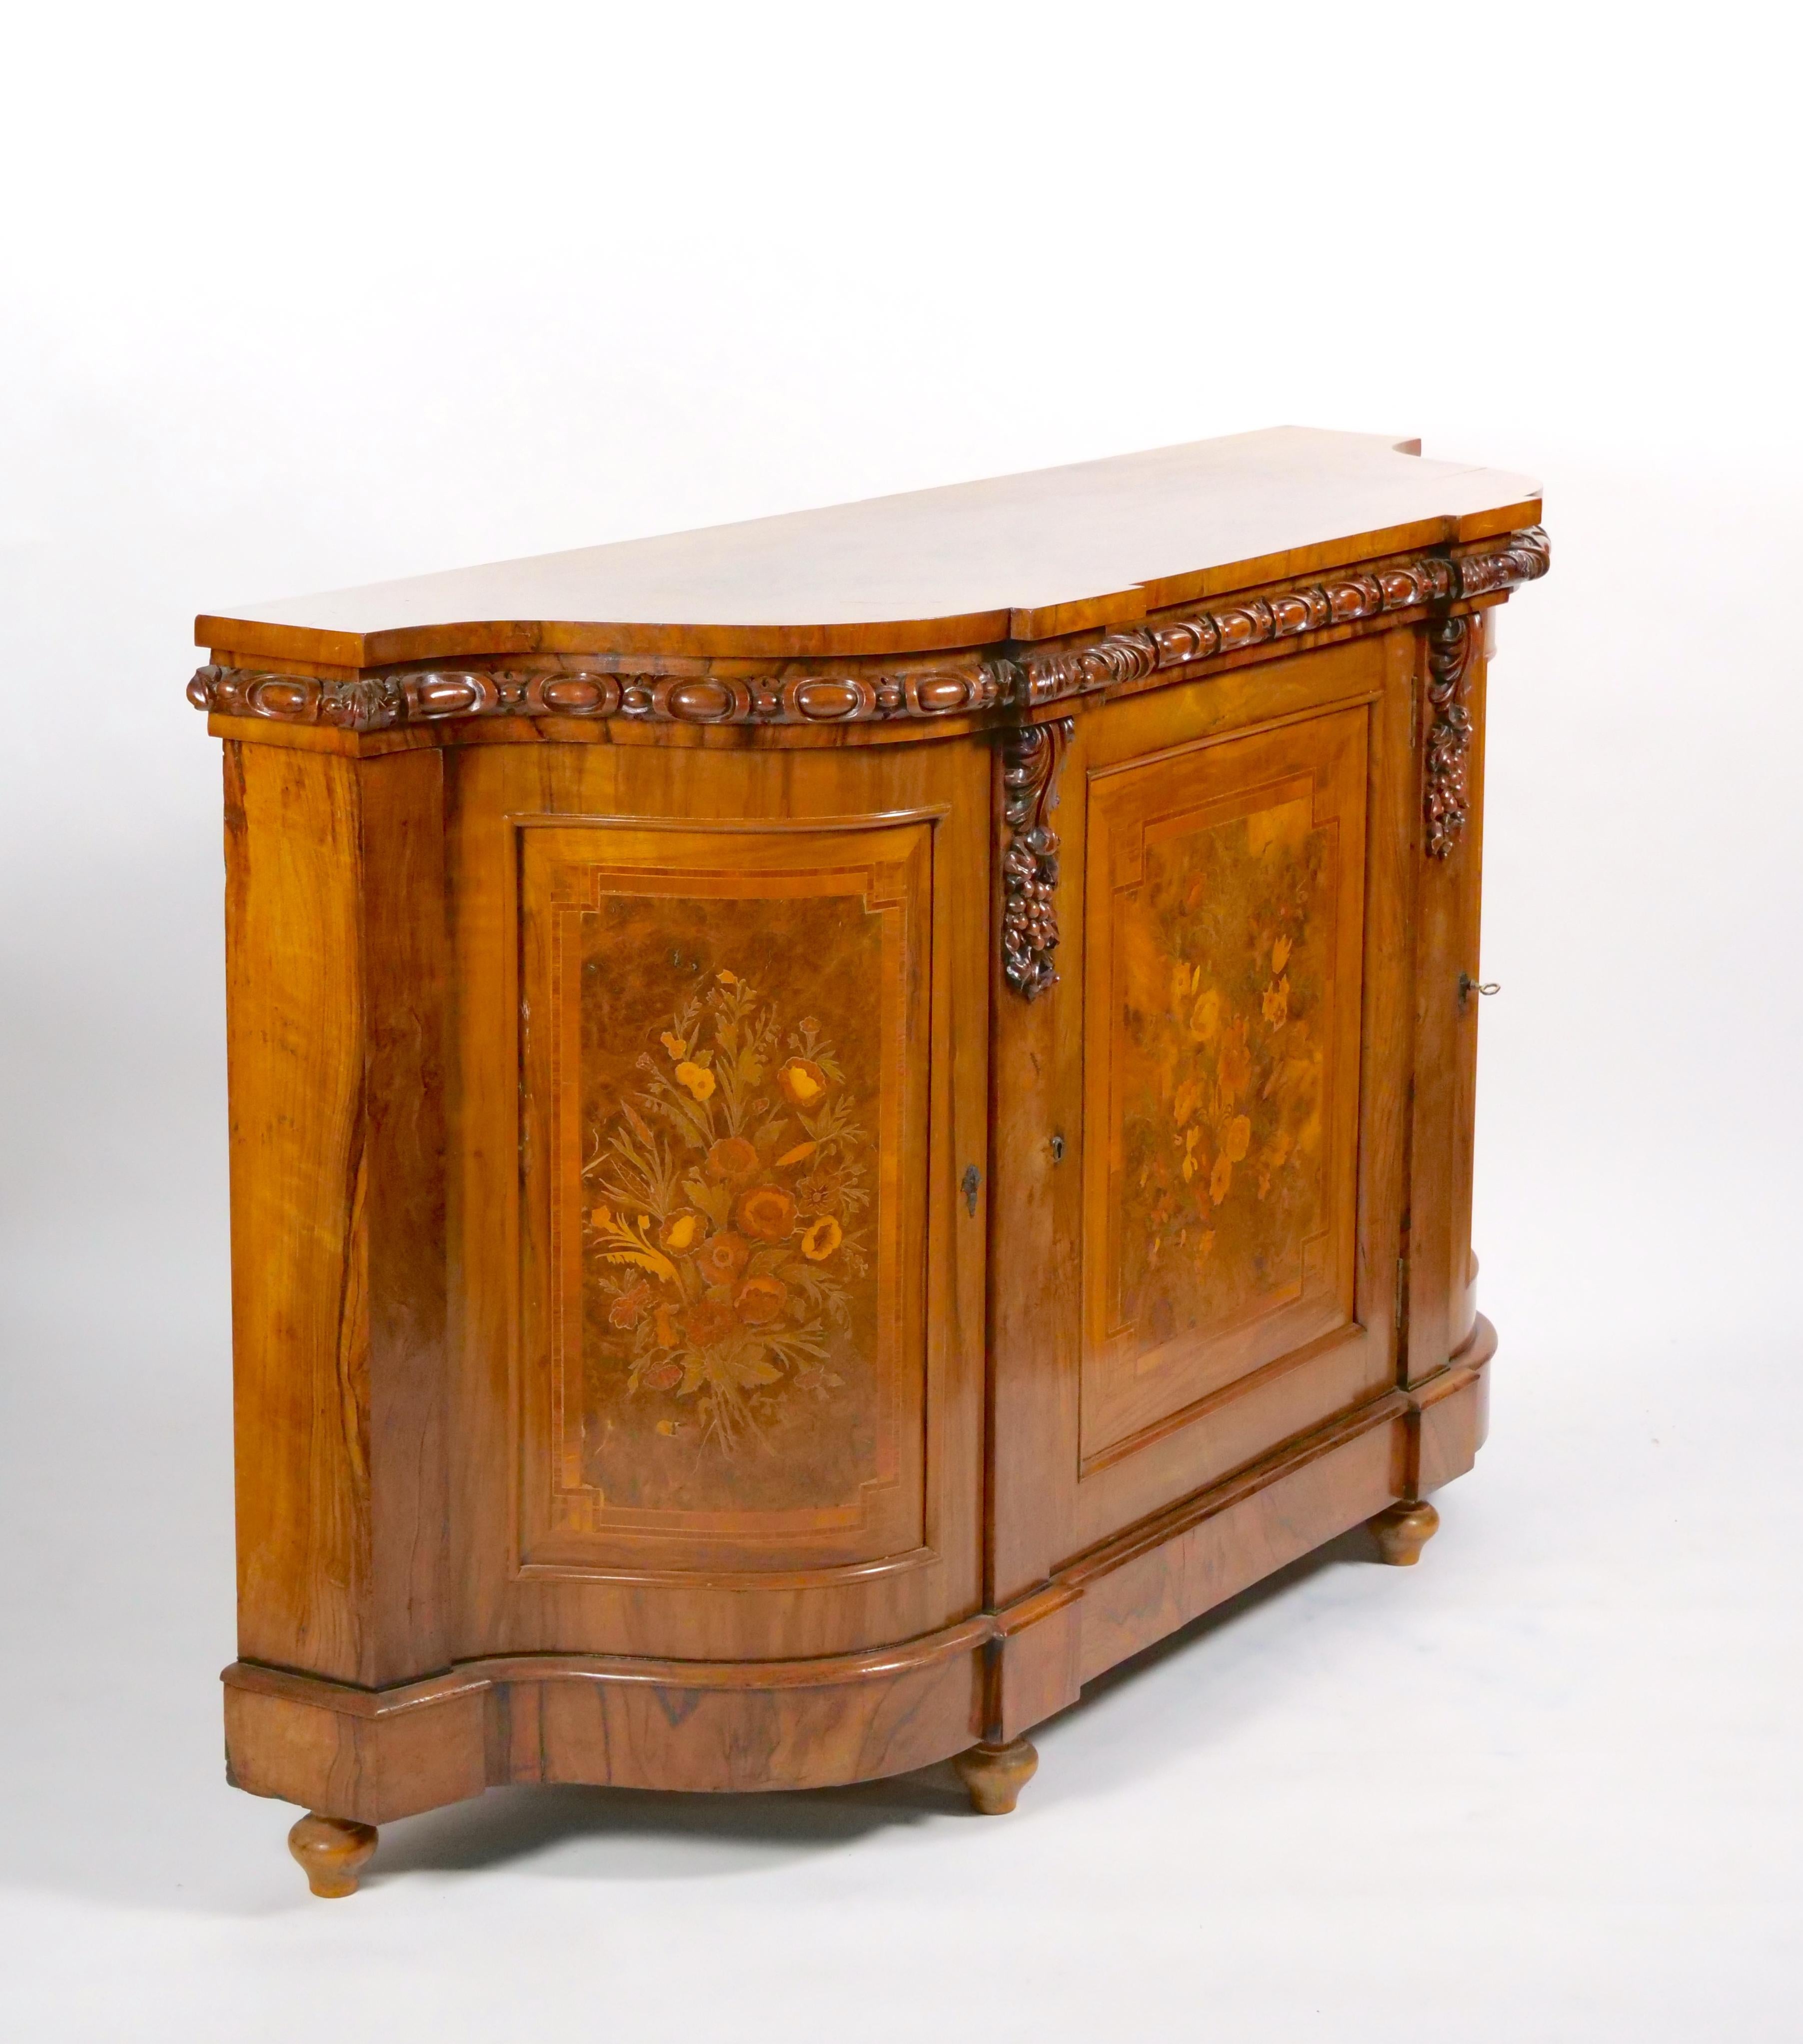 Elevate your living space with this exquisite Early 19th Century Victorian Figured Walnut and Marquetry Decorated Demilune Shape Credenza. This piece is a true representation of the Victorian era's elegance, craftsmanship, and attention to detail.